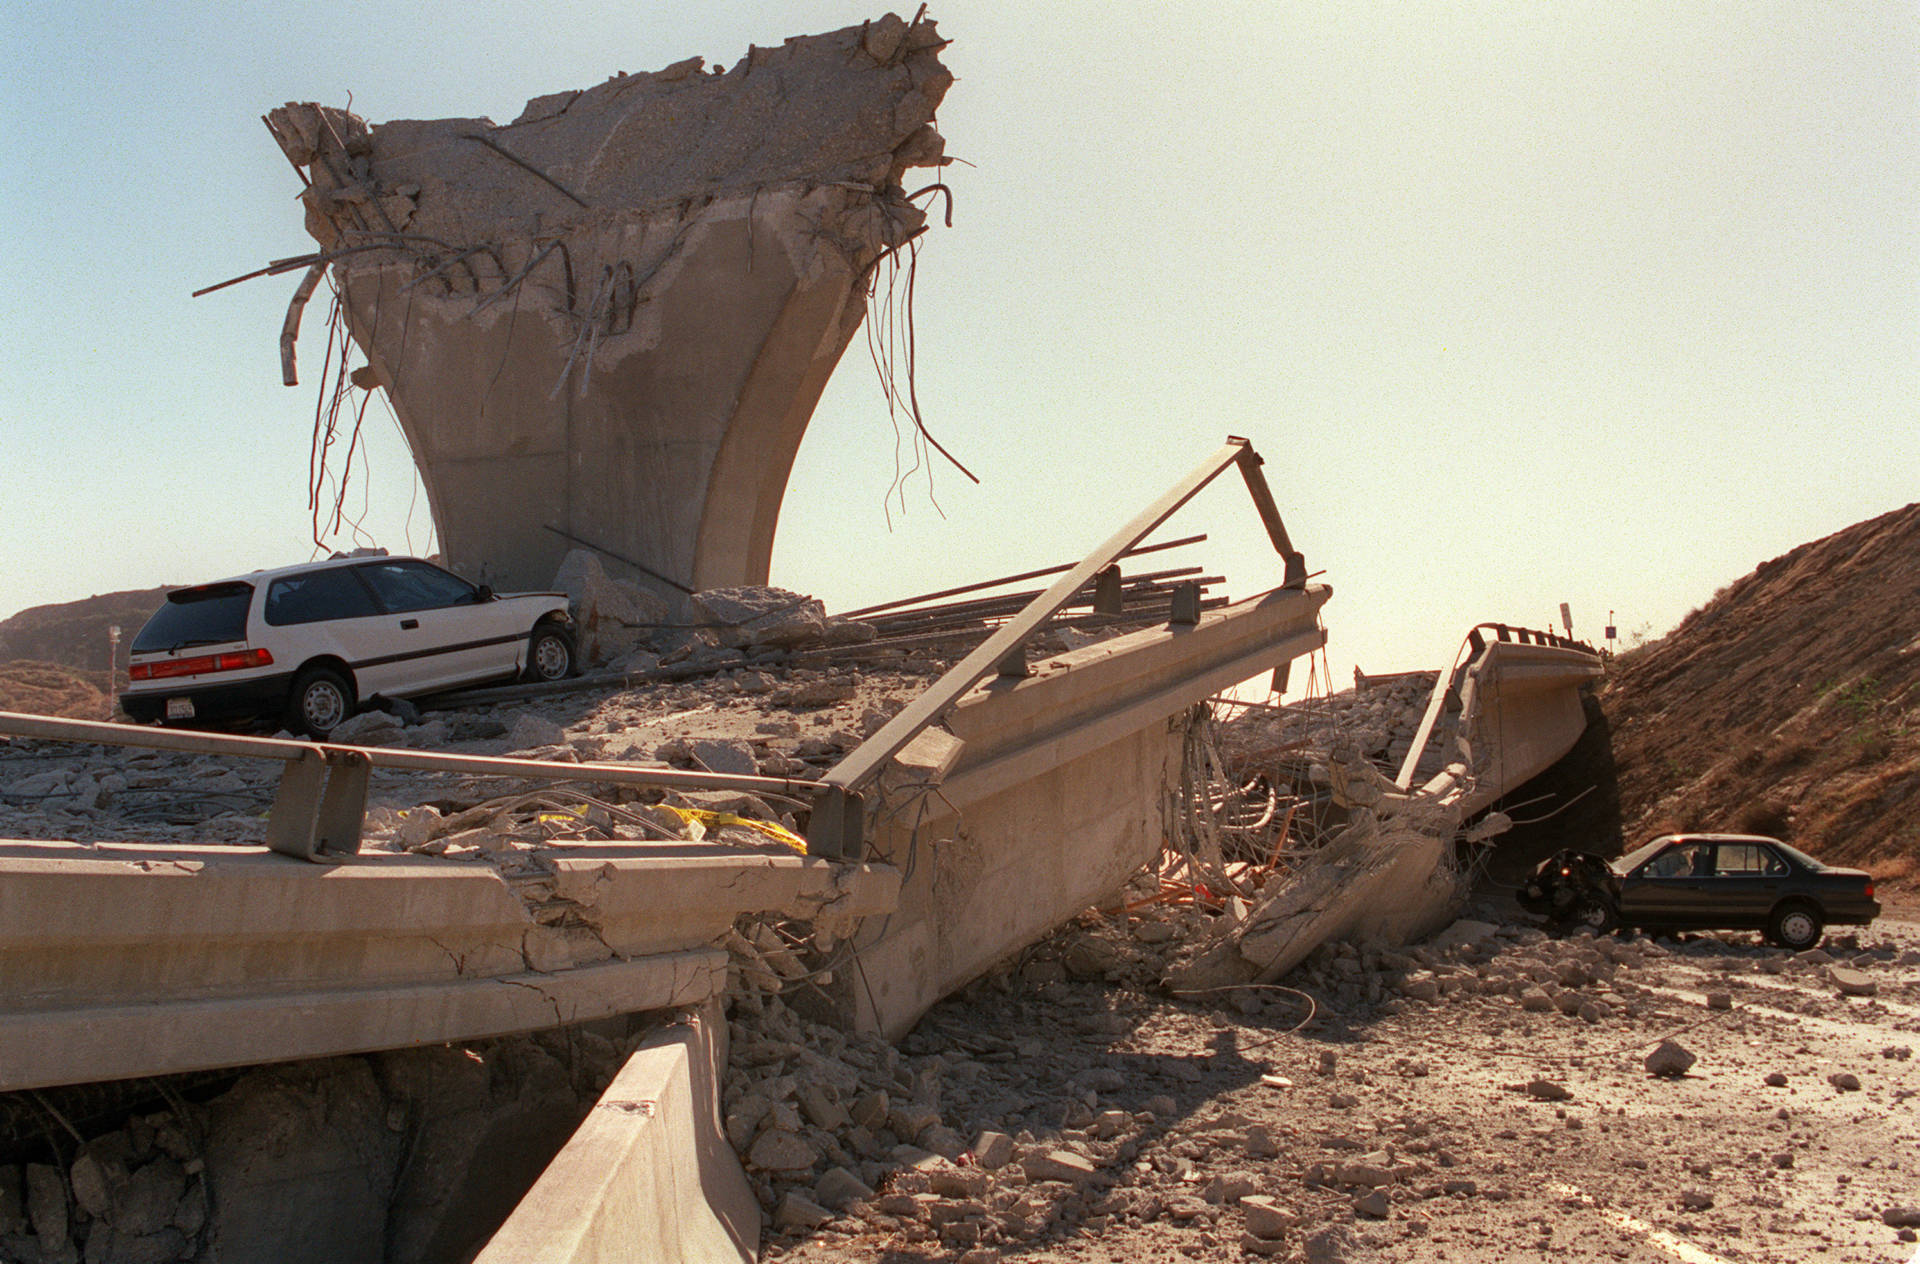 Cars lie smashed by the collapsed Interstate 5 connector few hours after Northridge earthquake, on January 17, 1994, in Sylmar, California. Jonathan Nourak/AFP/Getty Images